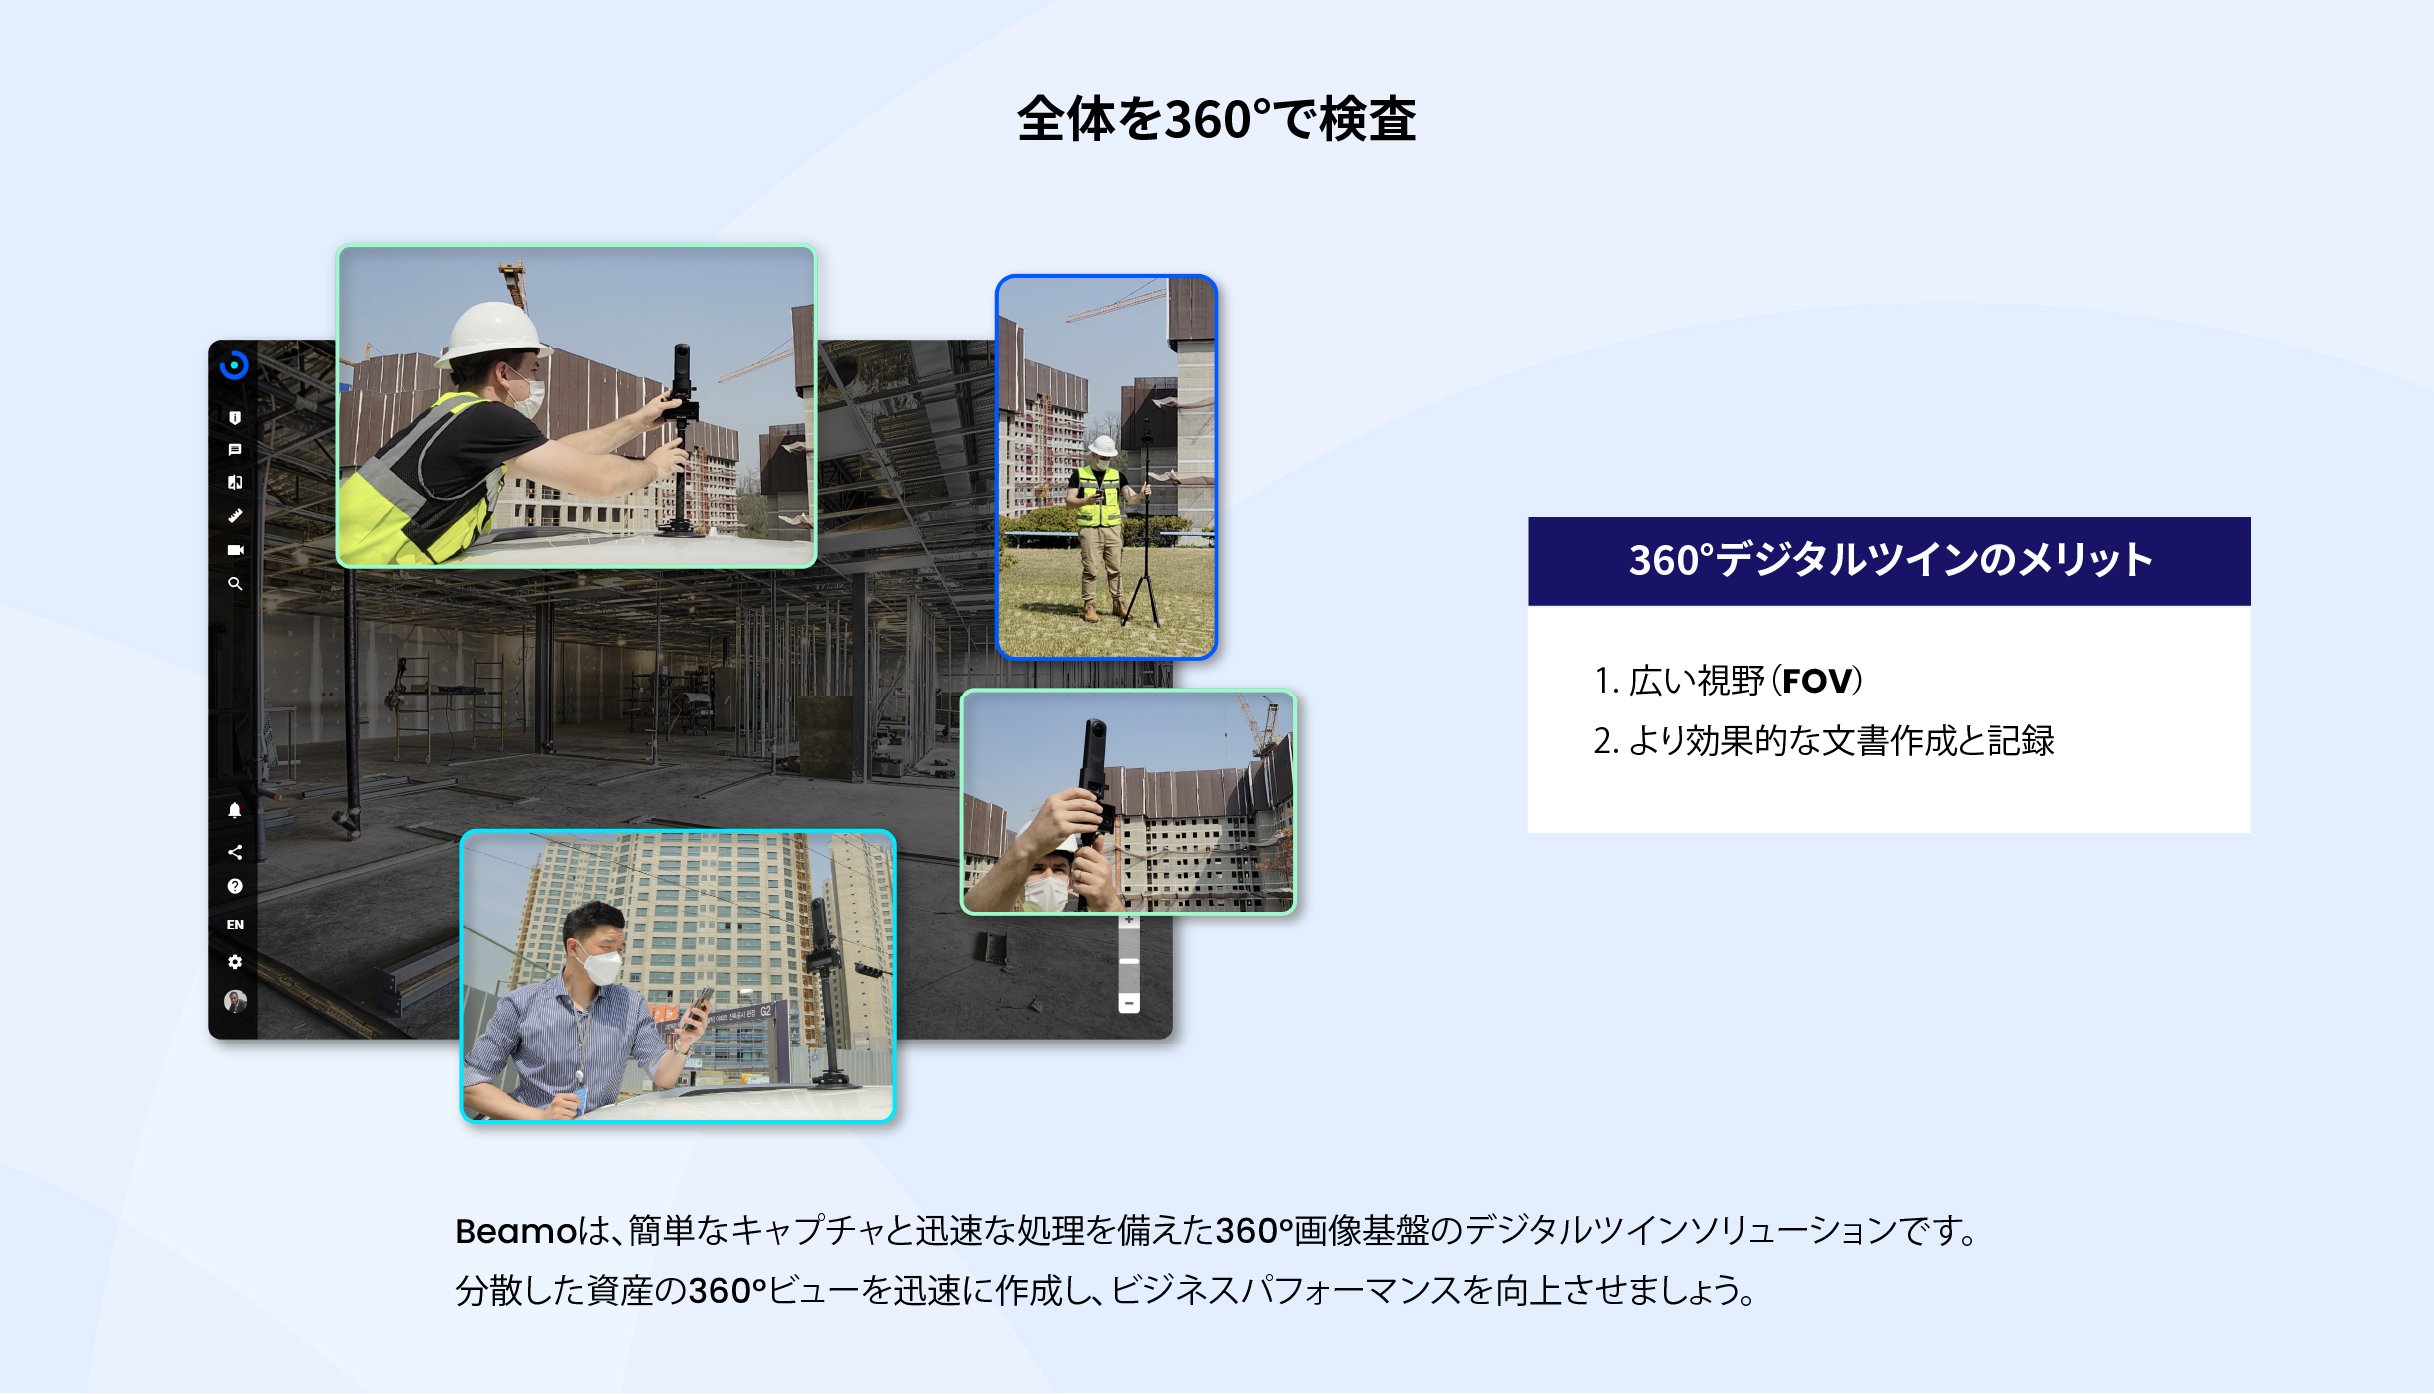 why 360 view is better for remote inspection 사본_JP@2x-100